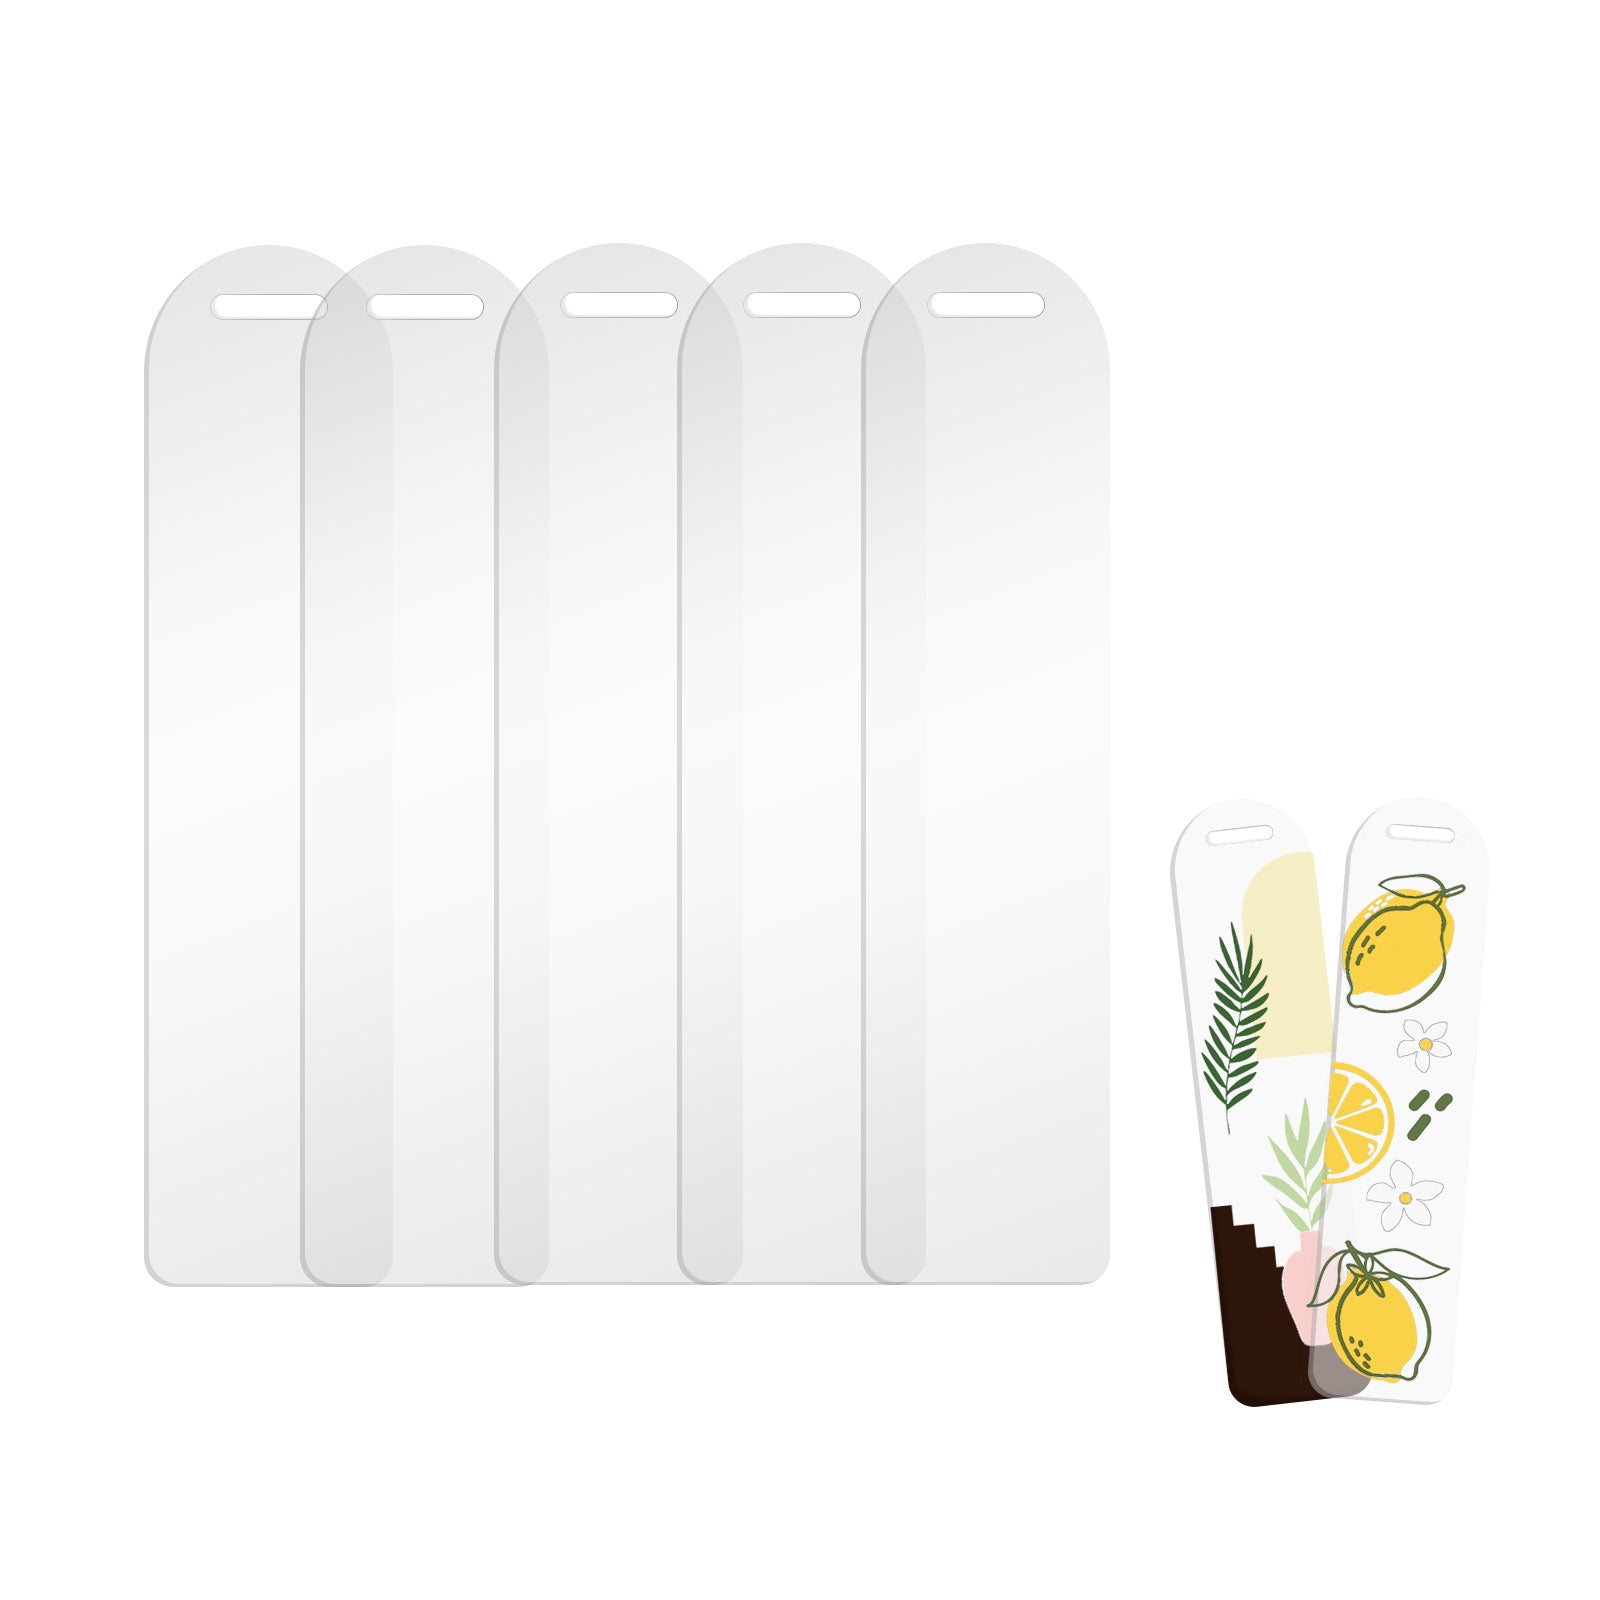 Clear Acrylic Bookmark craft blanks 5 in a pack